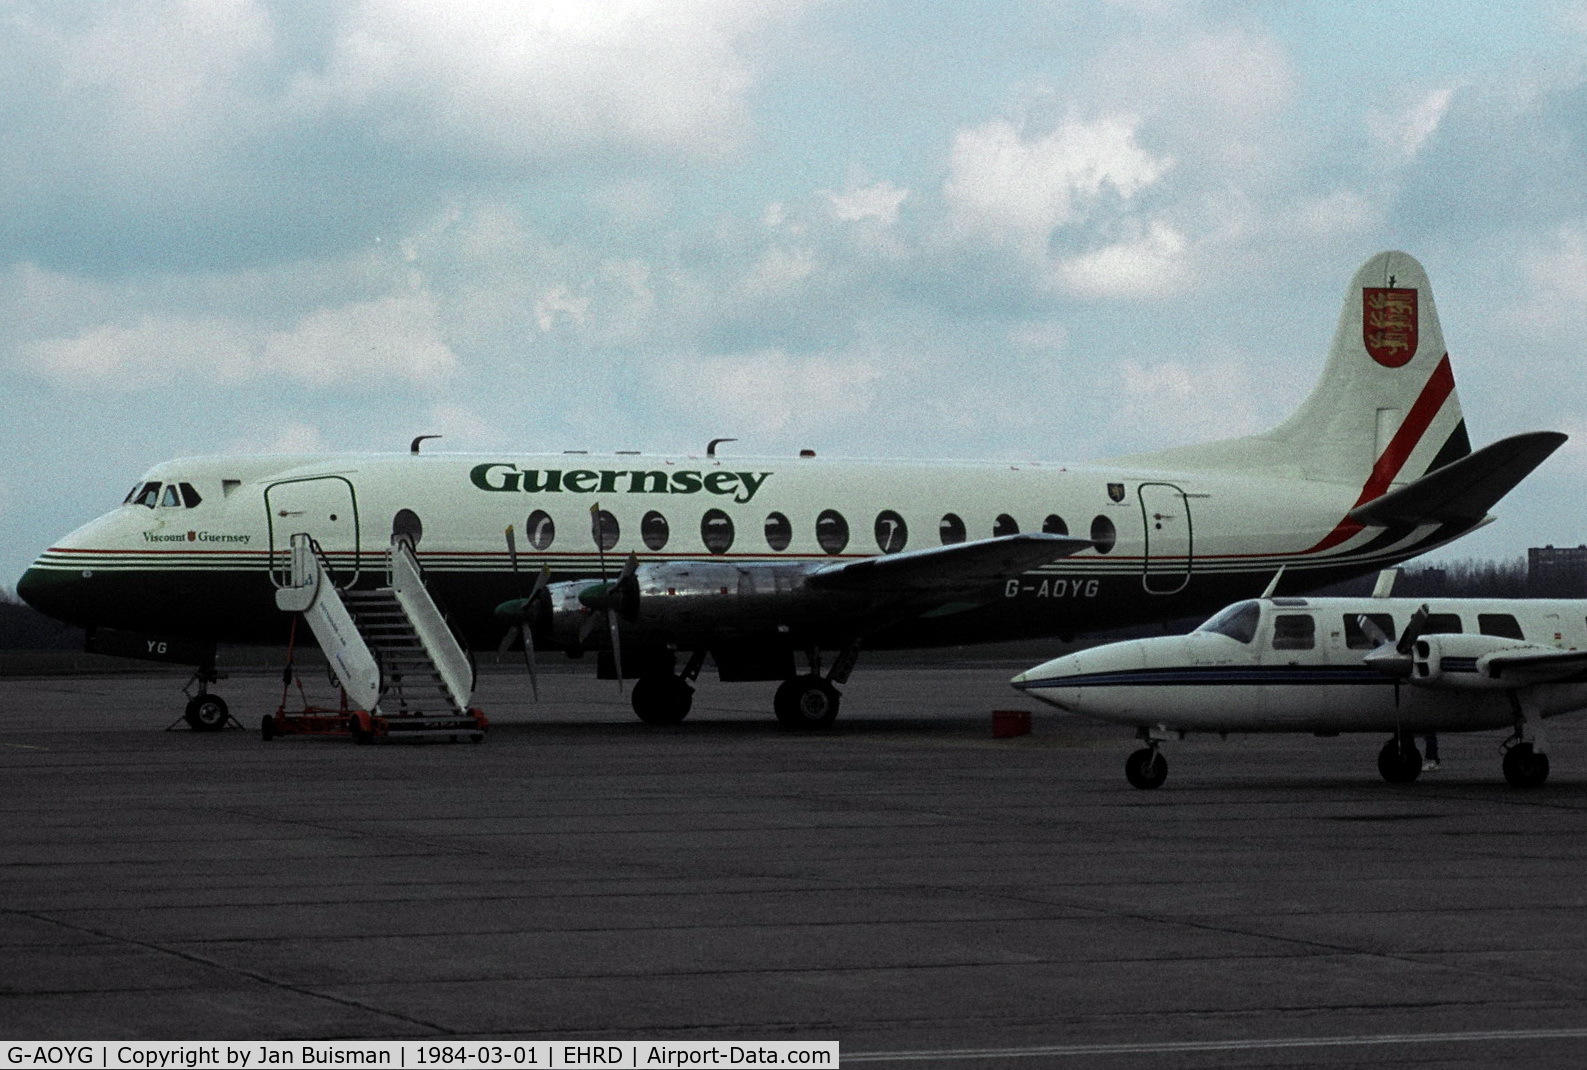 G-AOYG, 1957 Vickers Viscount 806 C/N 256, Guernsey Airlines